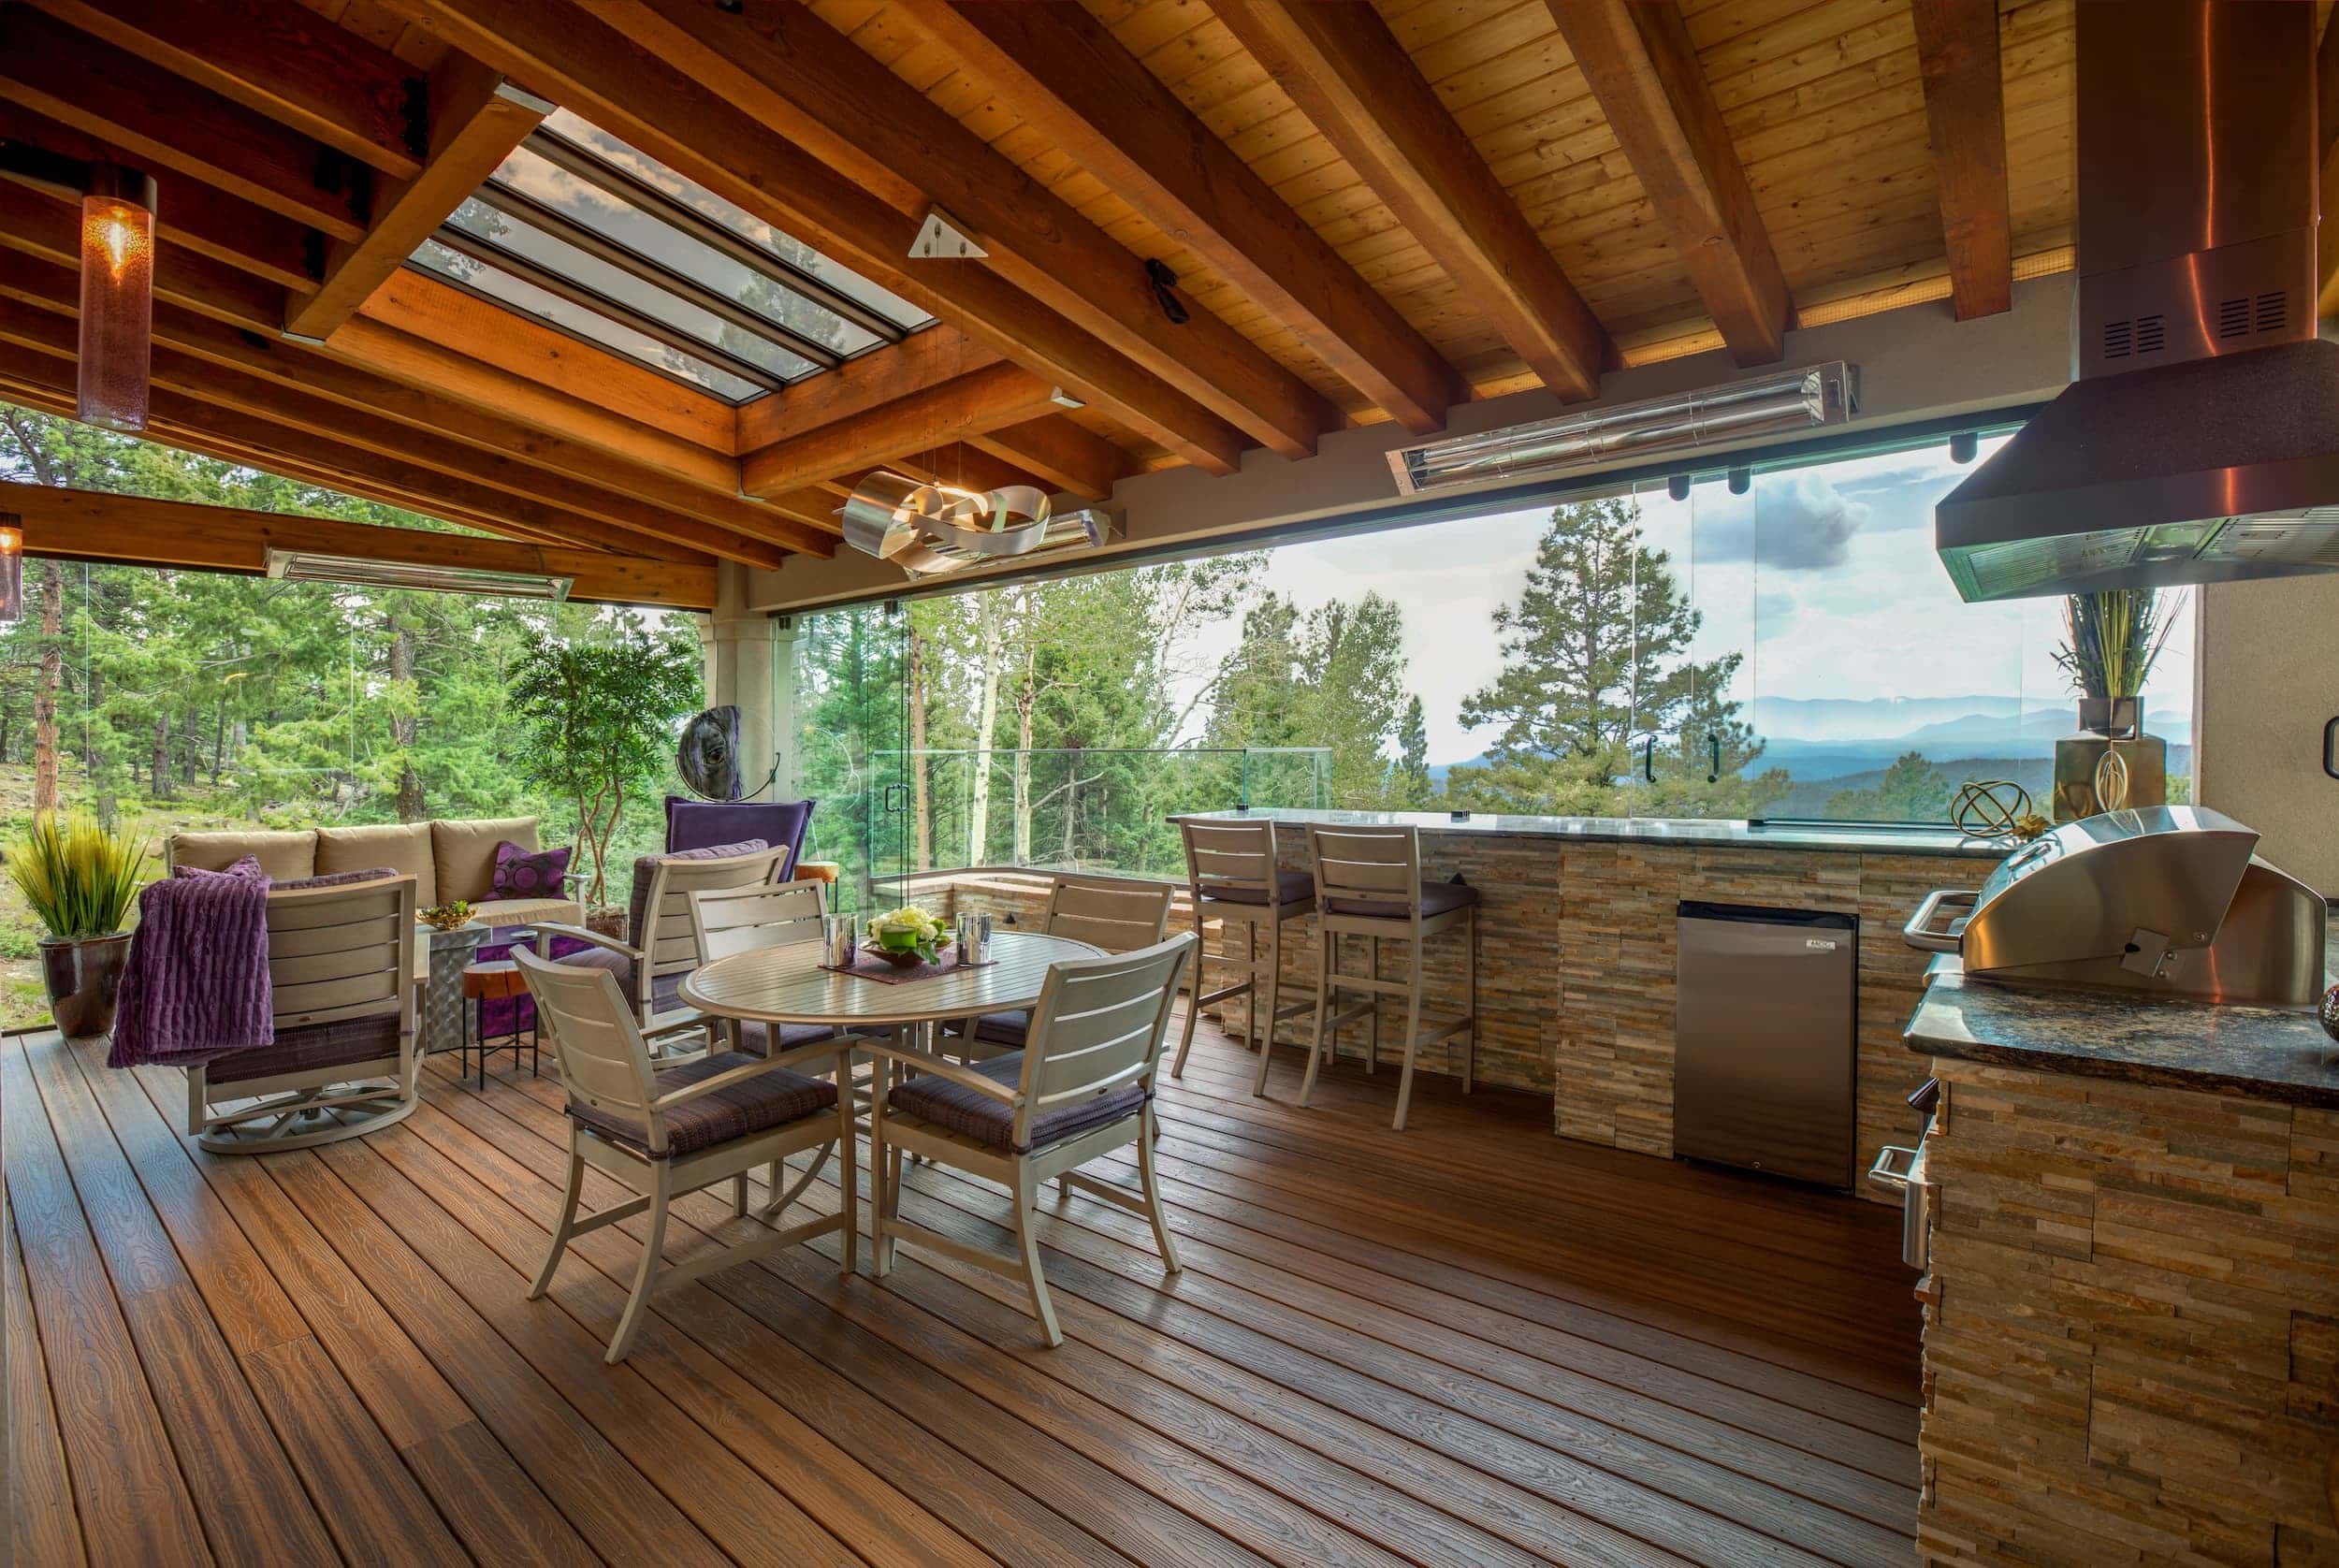 An outdoor kitchen with a view of the mountains.